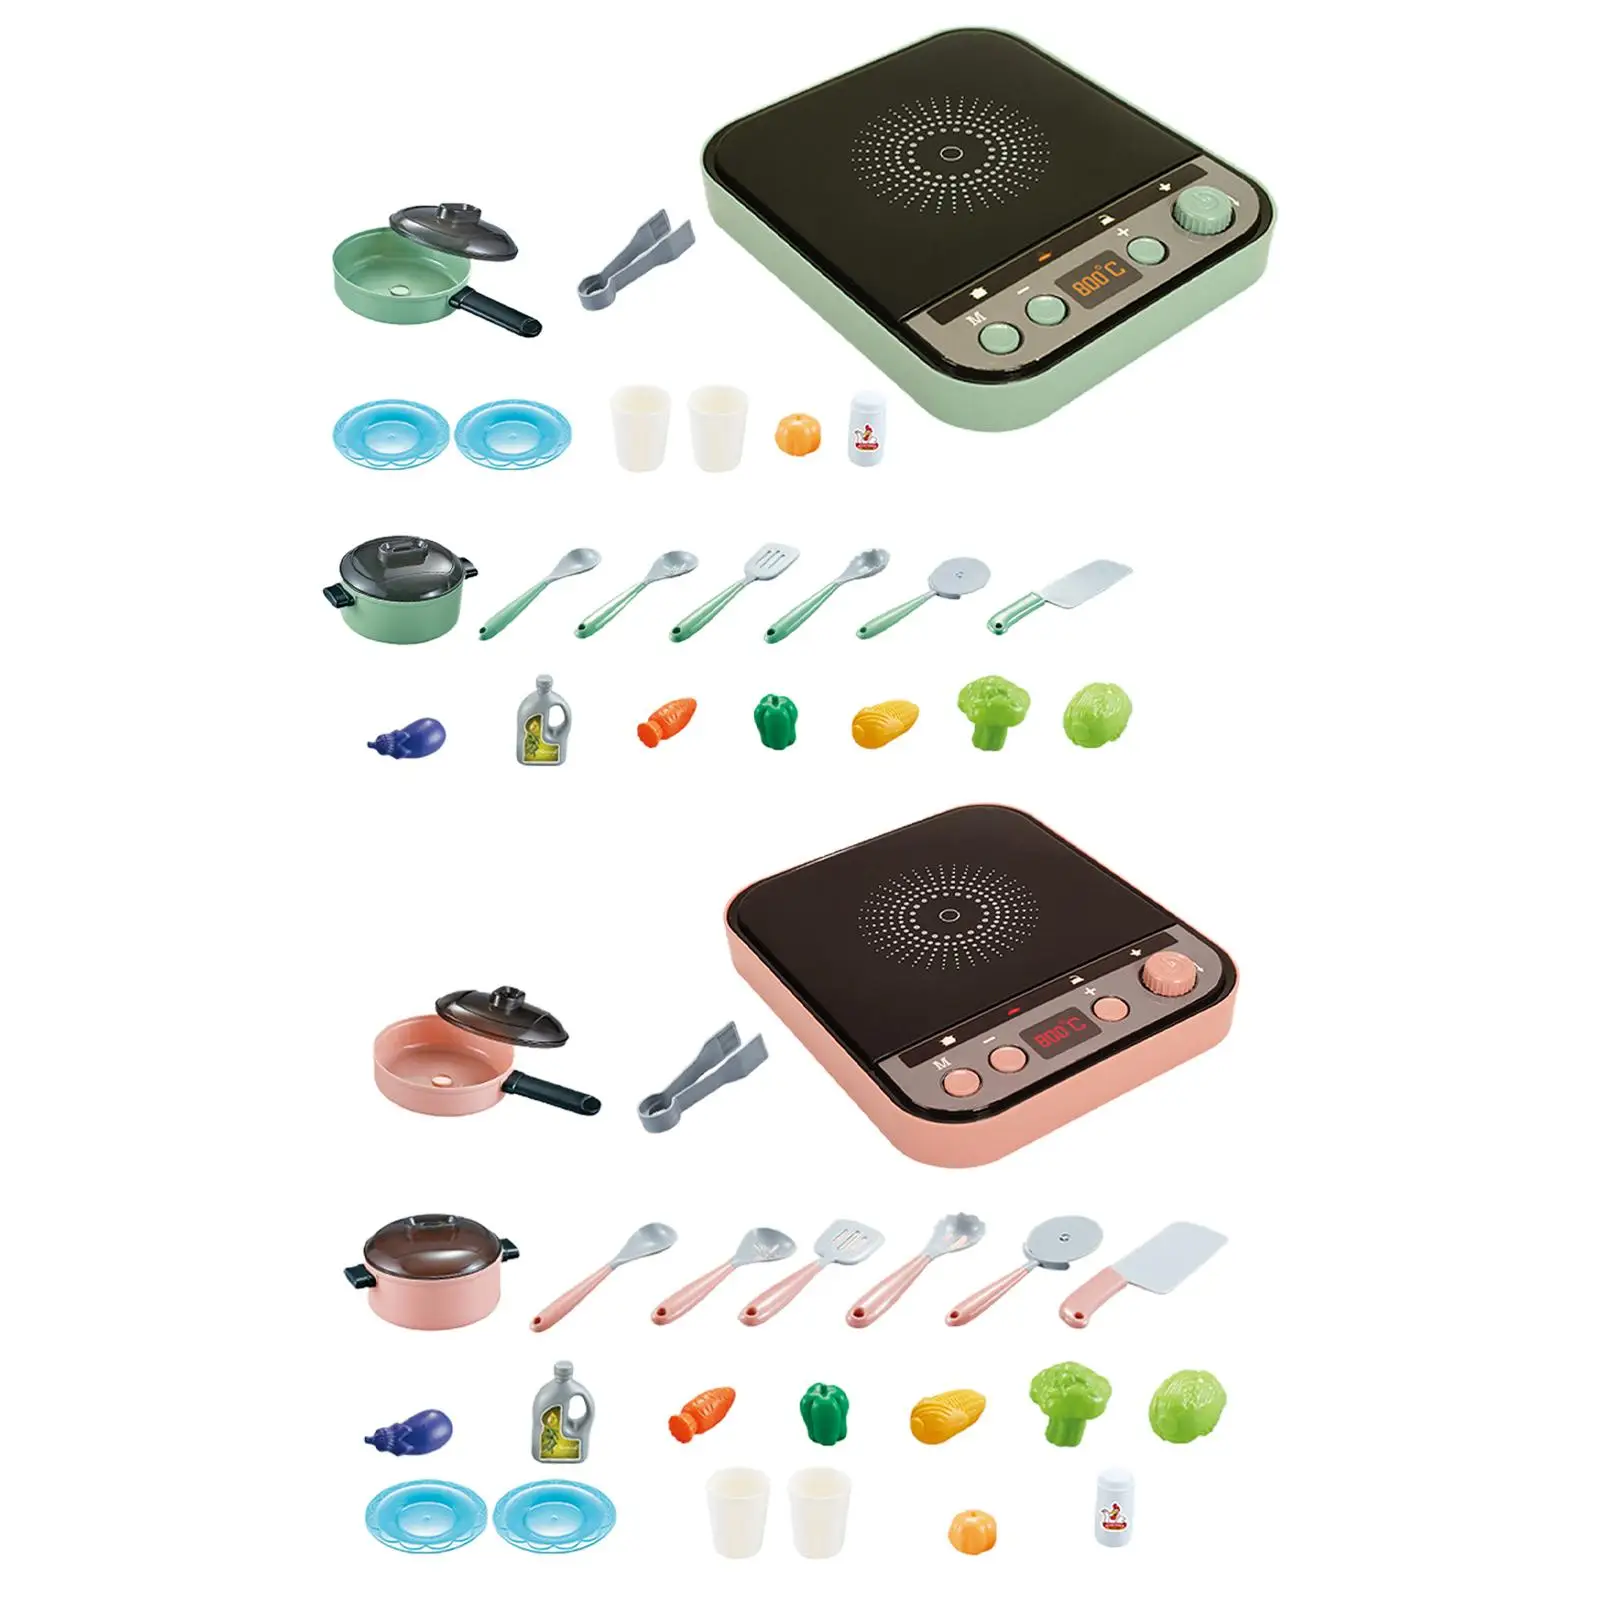 25 Pieces Kitchen Accessories Set Toys Induction Cooker with Sound and Light